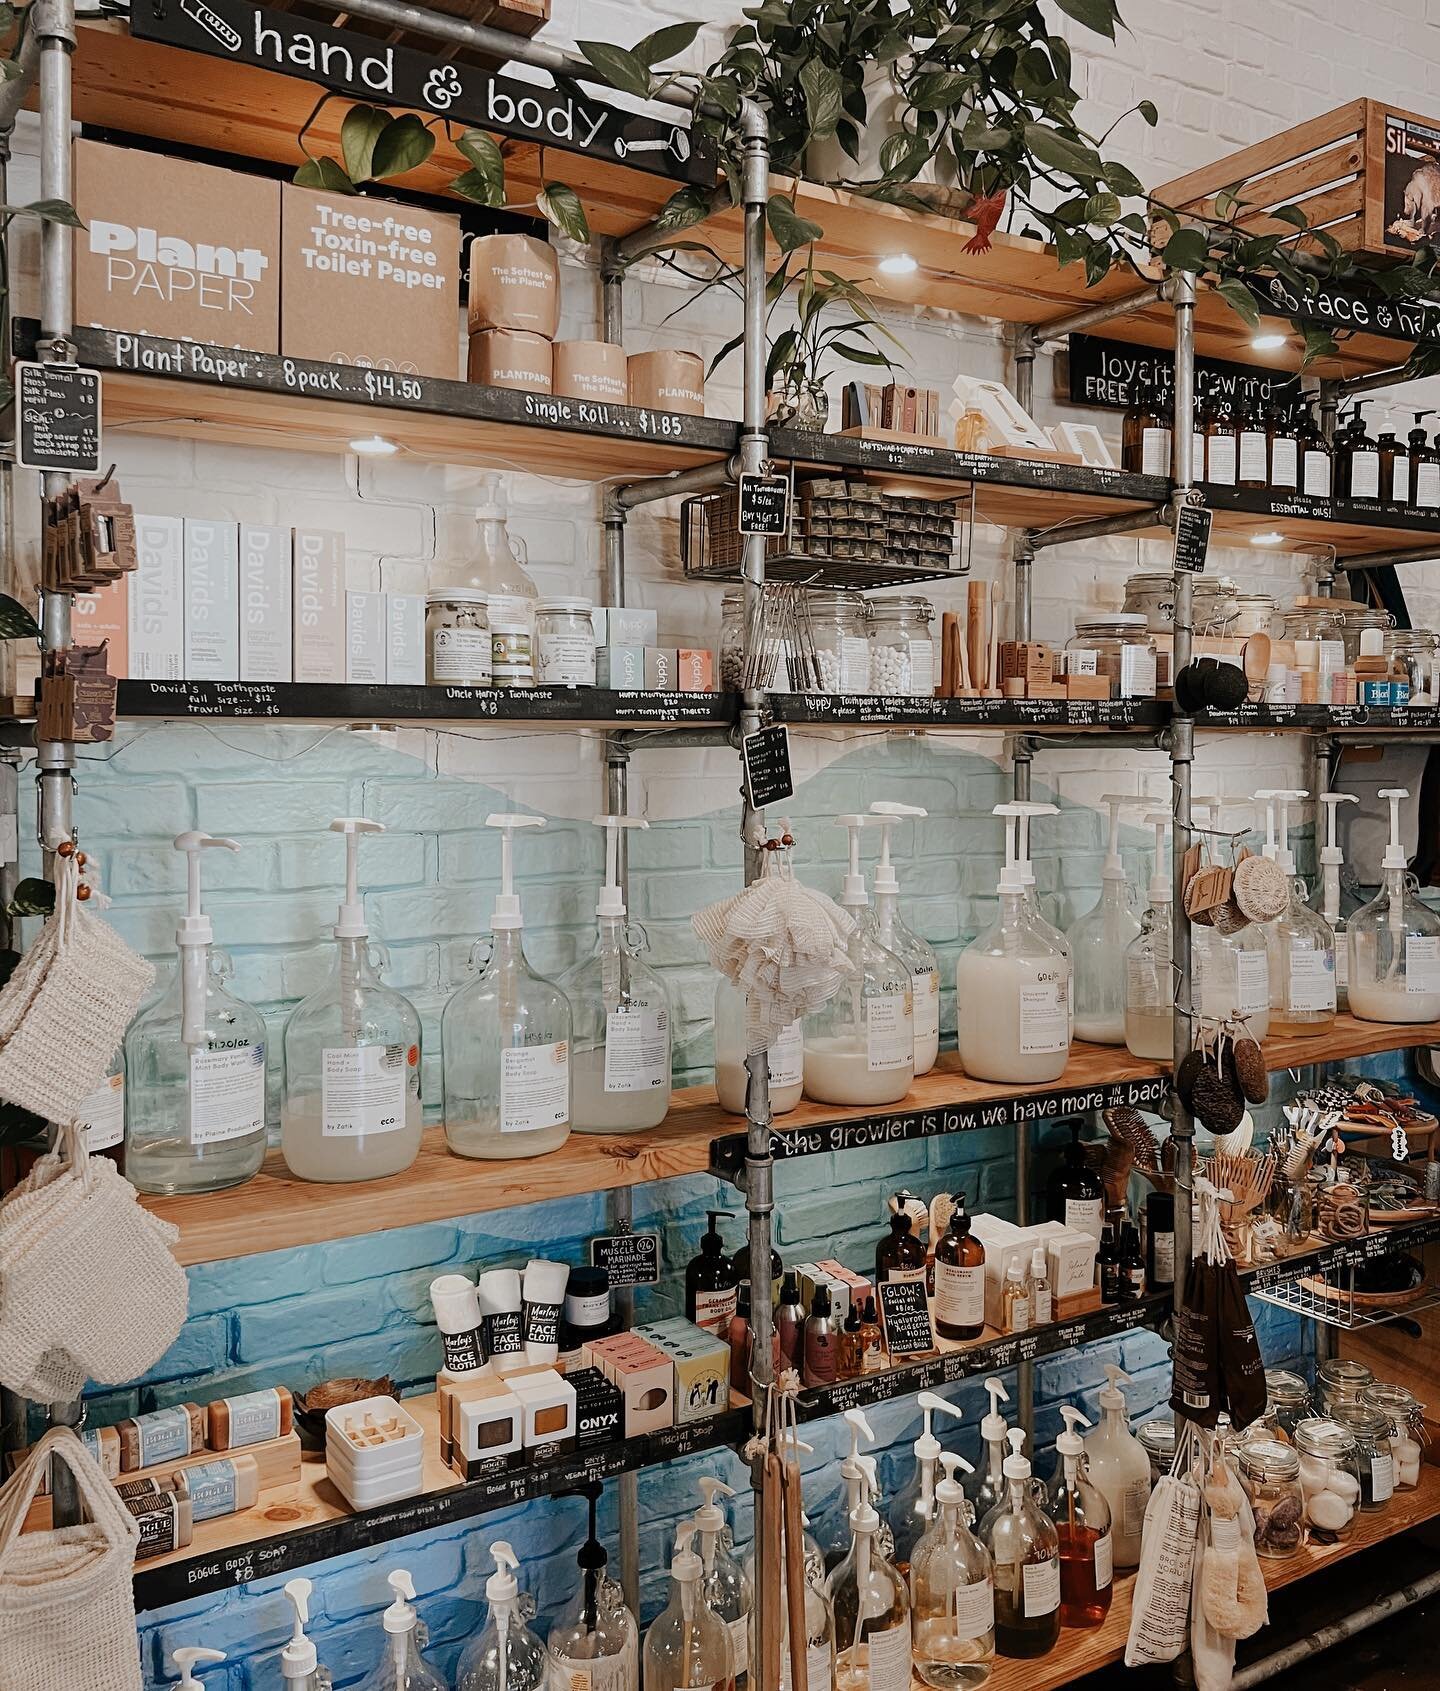 It&rsquo;s #earthday on Saturday and to celebrate we&rsquo;re having events from 11-3 at The LAB &amp; doing an Earth Day giveaway! @eco.now.ca is giving away a bottle refill caddy filled with Eco Now products, reusable goodies &amp; LAB merch! All y